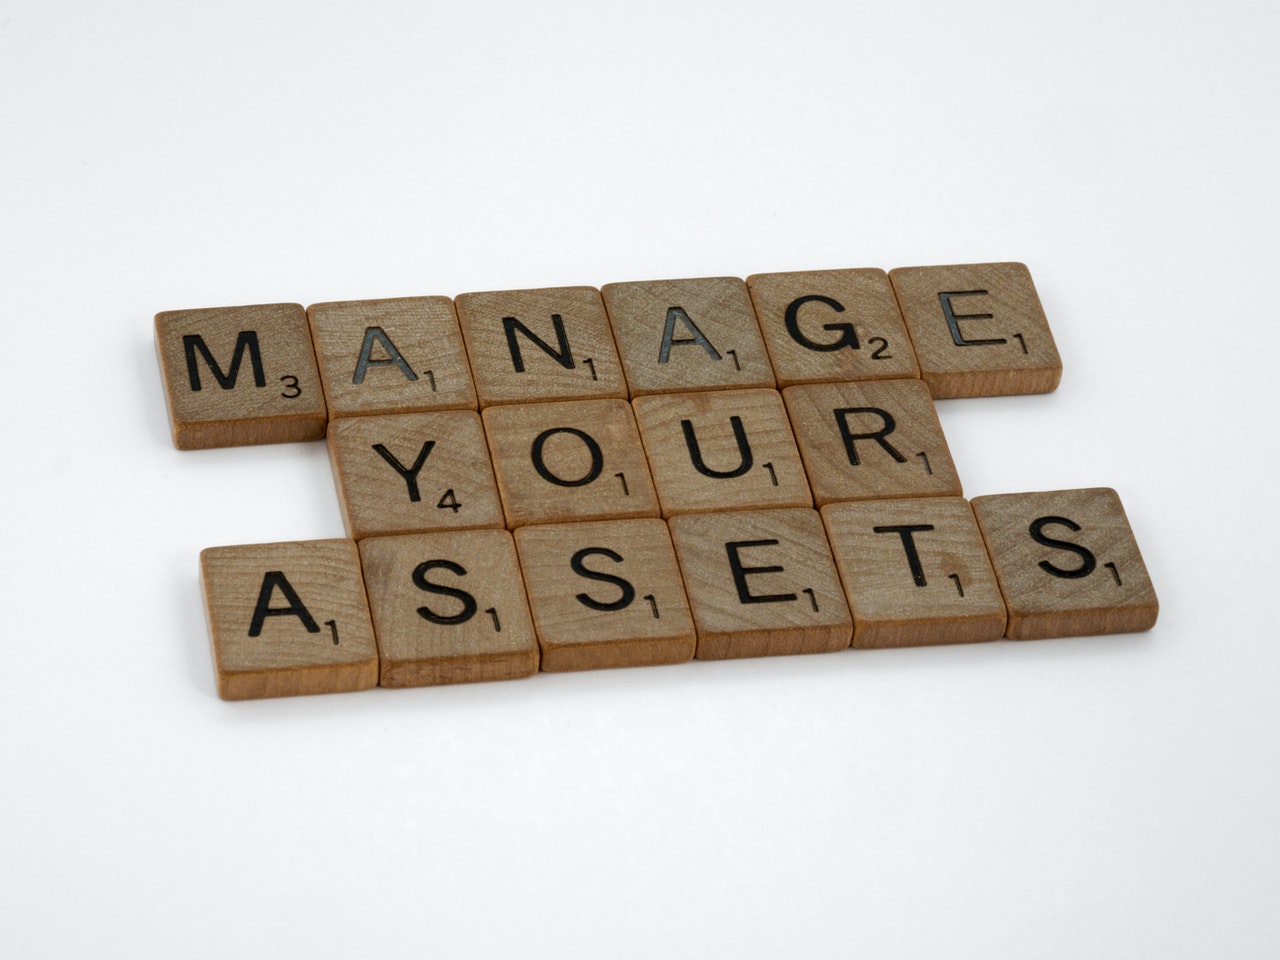 How To Achieve Optimal Asset Allocation